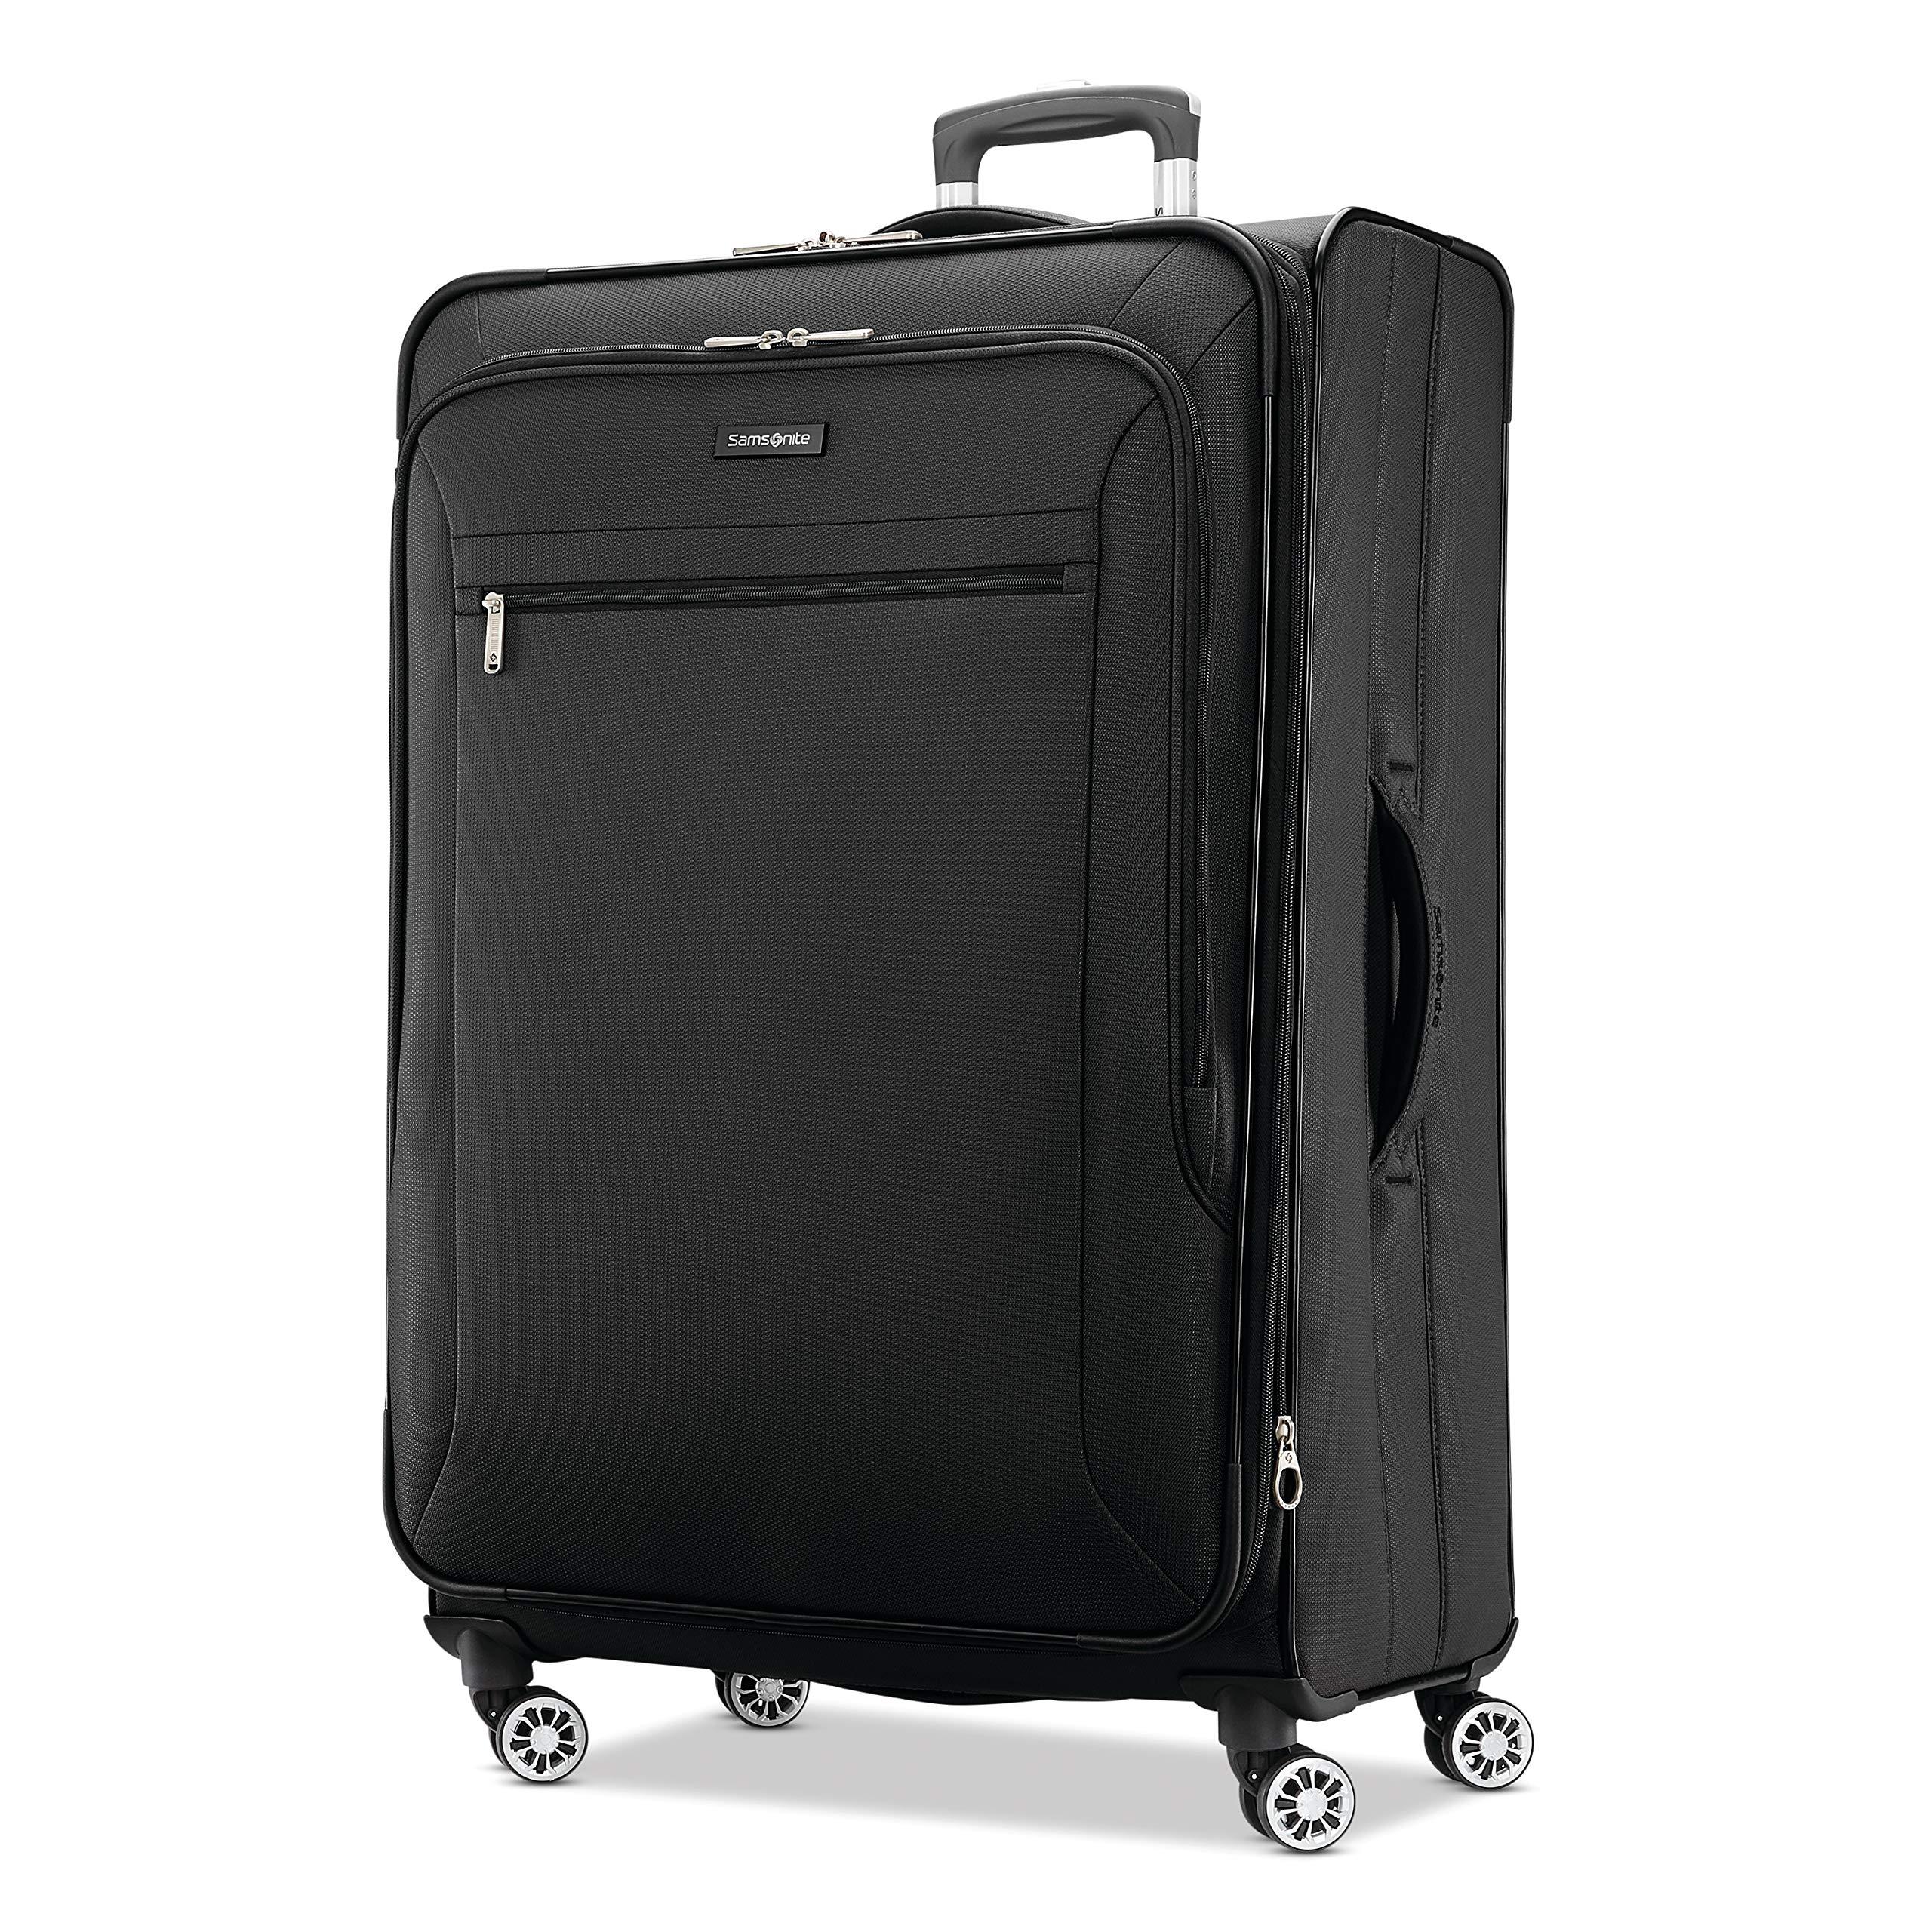 Samsonite Ascella X Softside Expandable Luggage With Spinner Wheels in ...